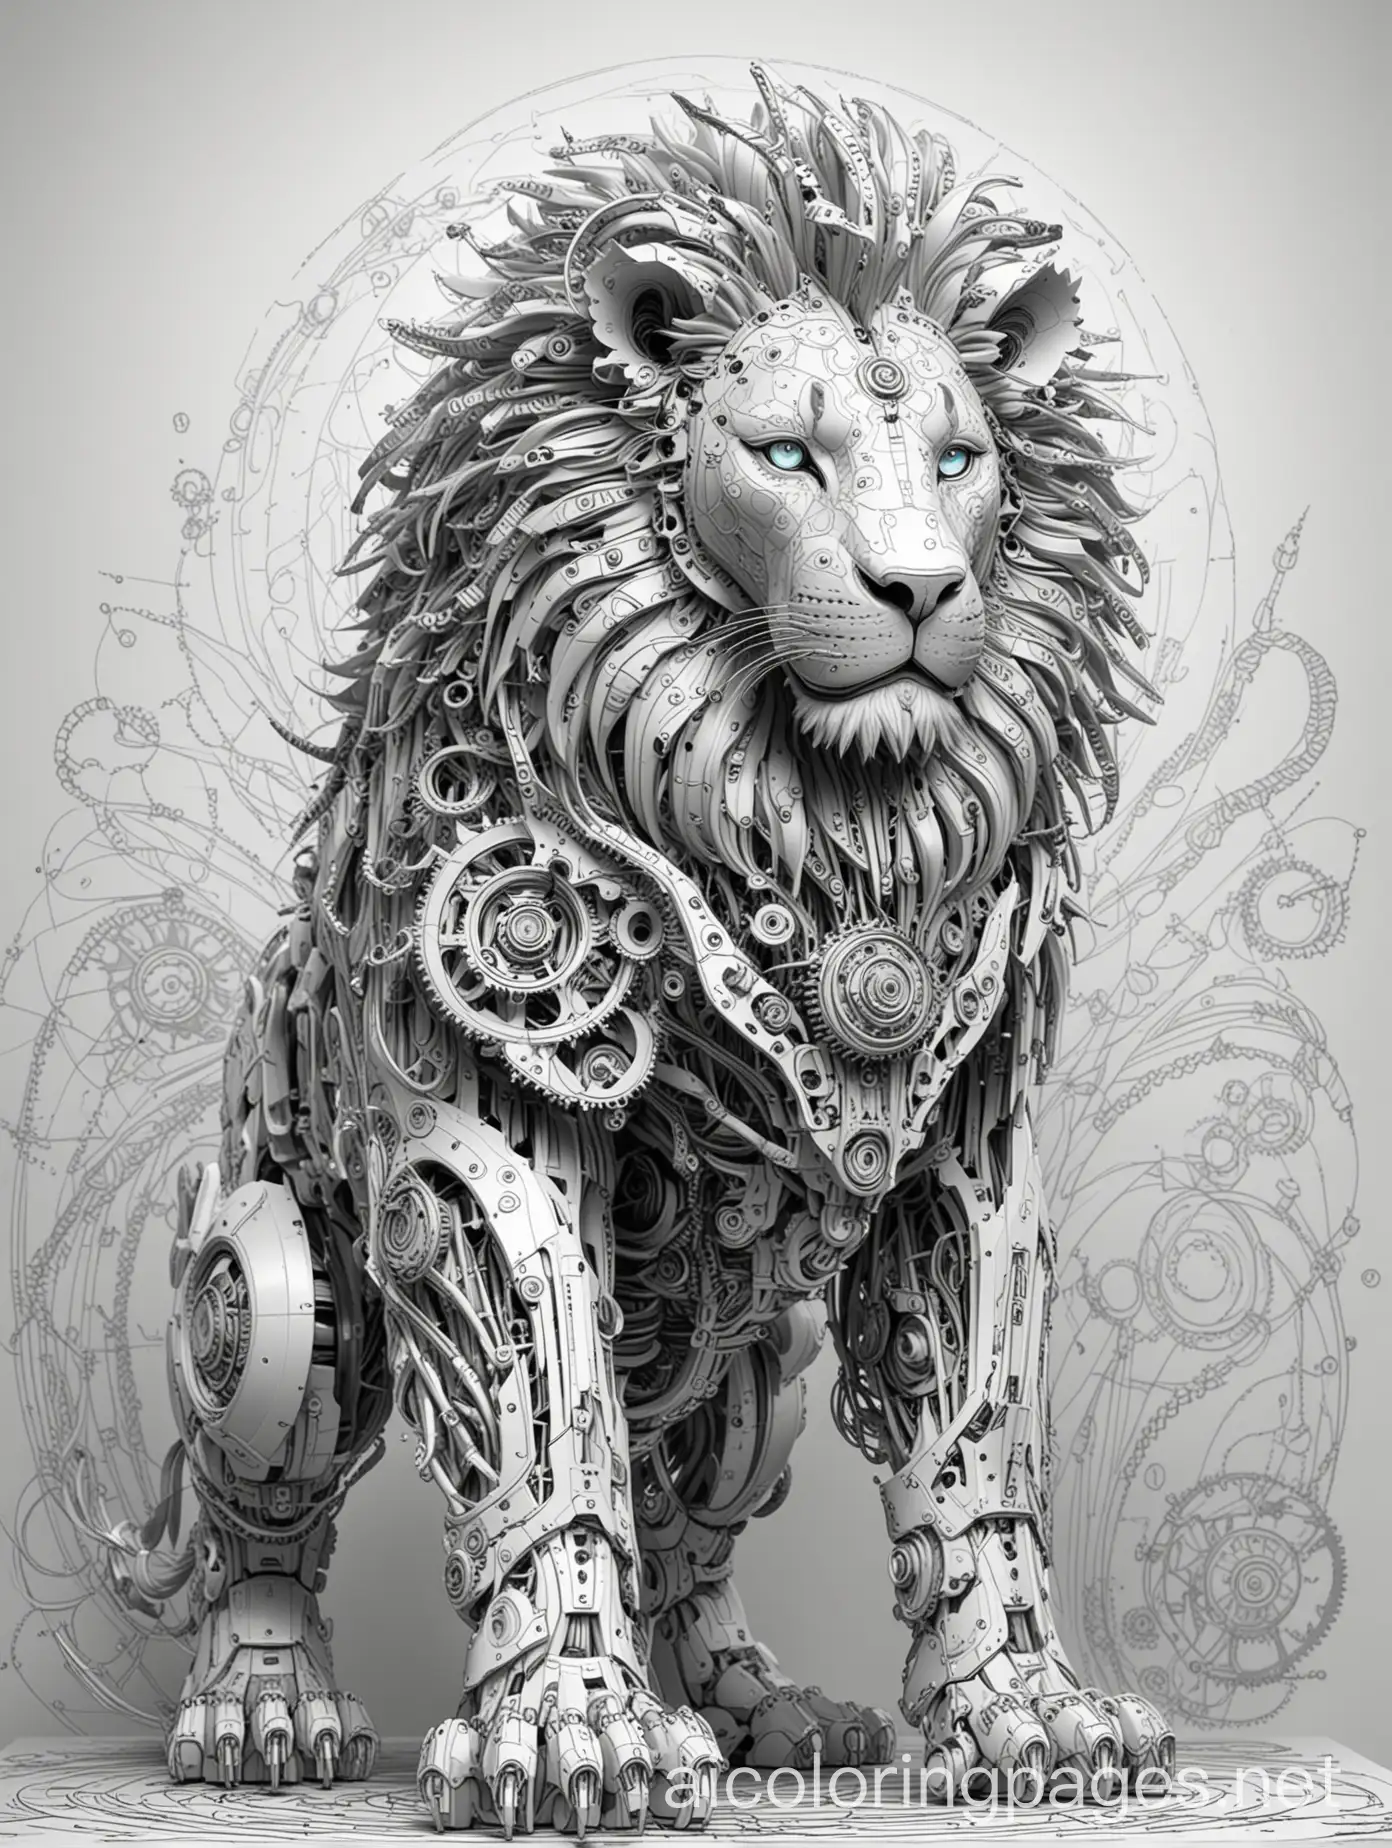 Regal-RoboLion-Intricate-Gear-Mane-and-Glowing-Optics-Coloring-Page